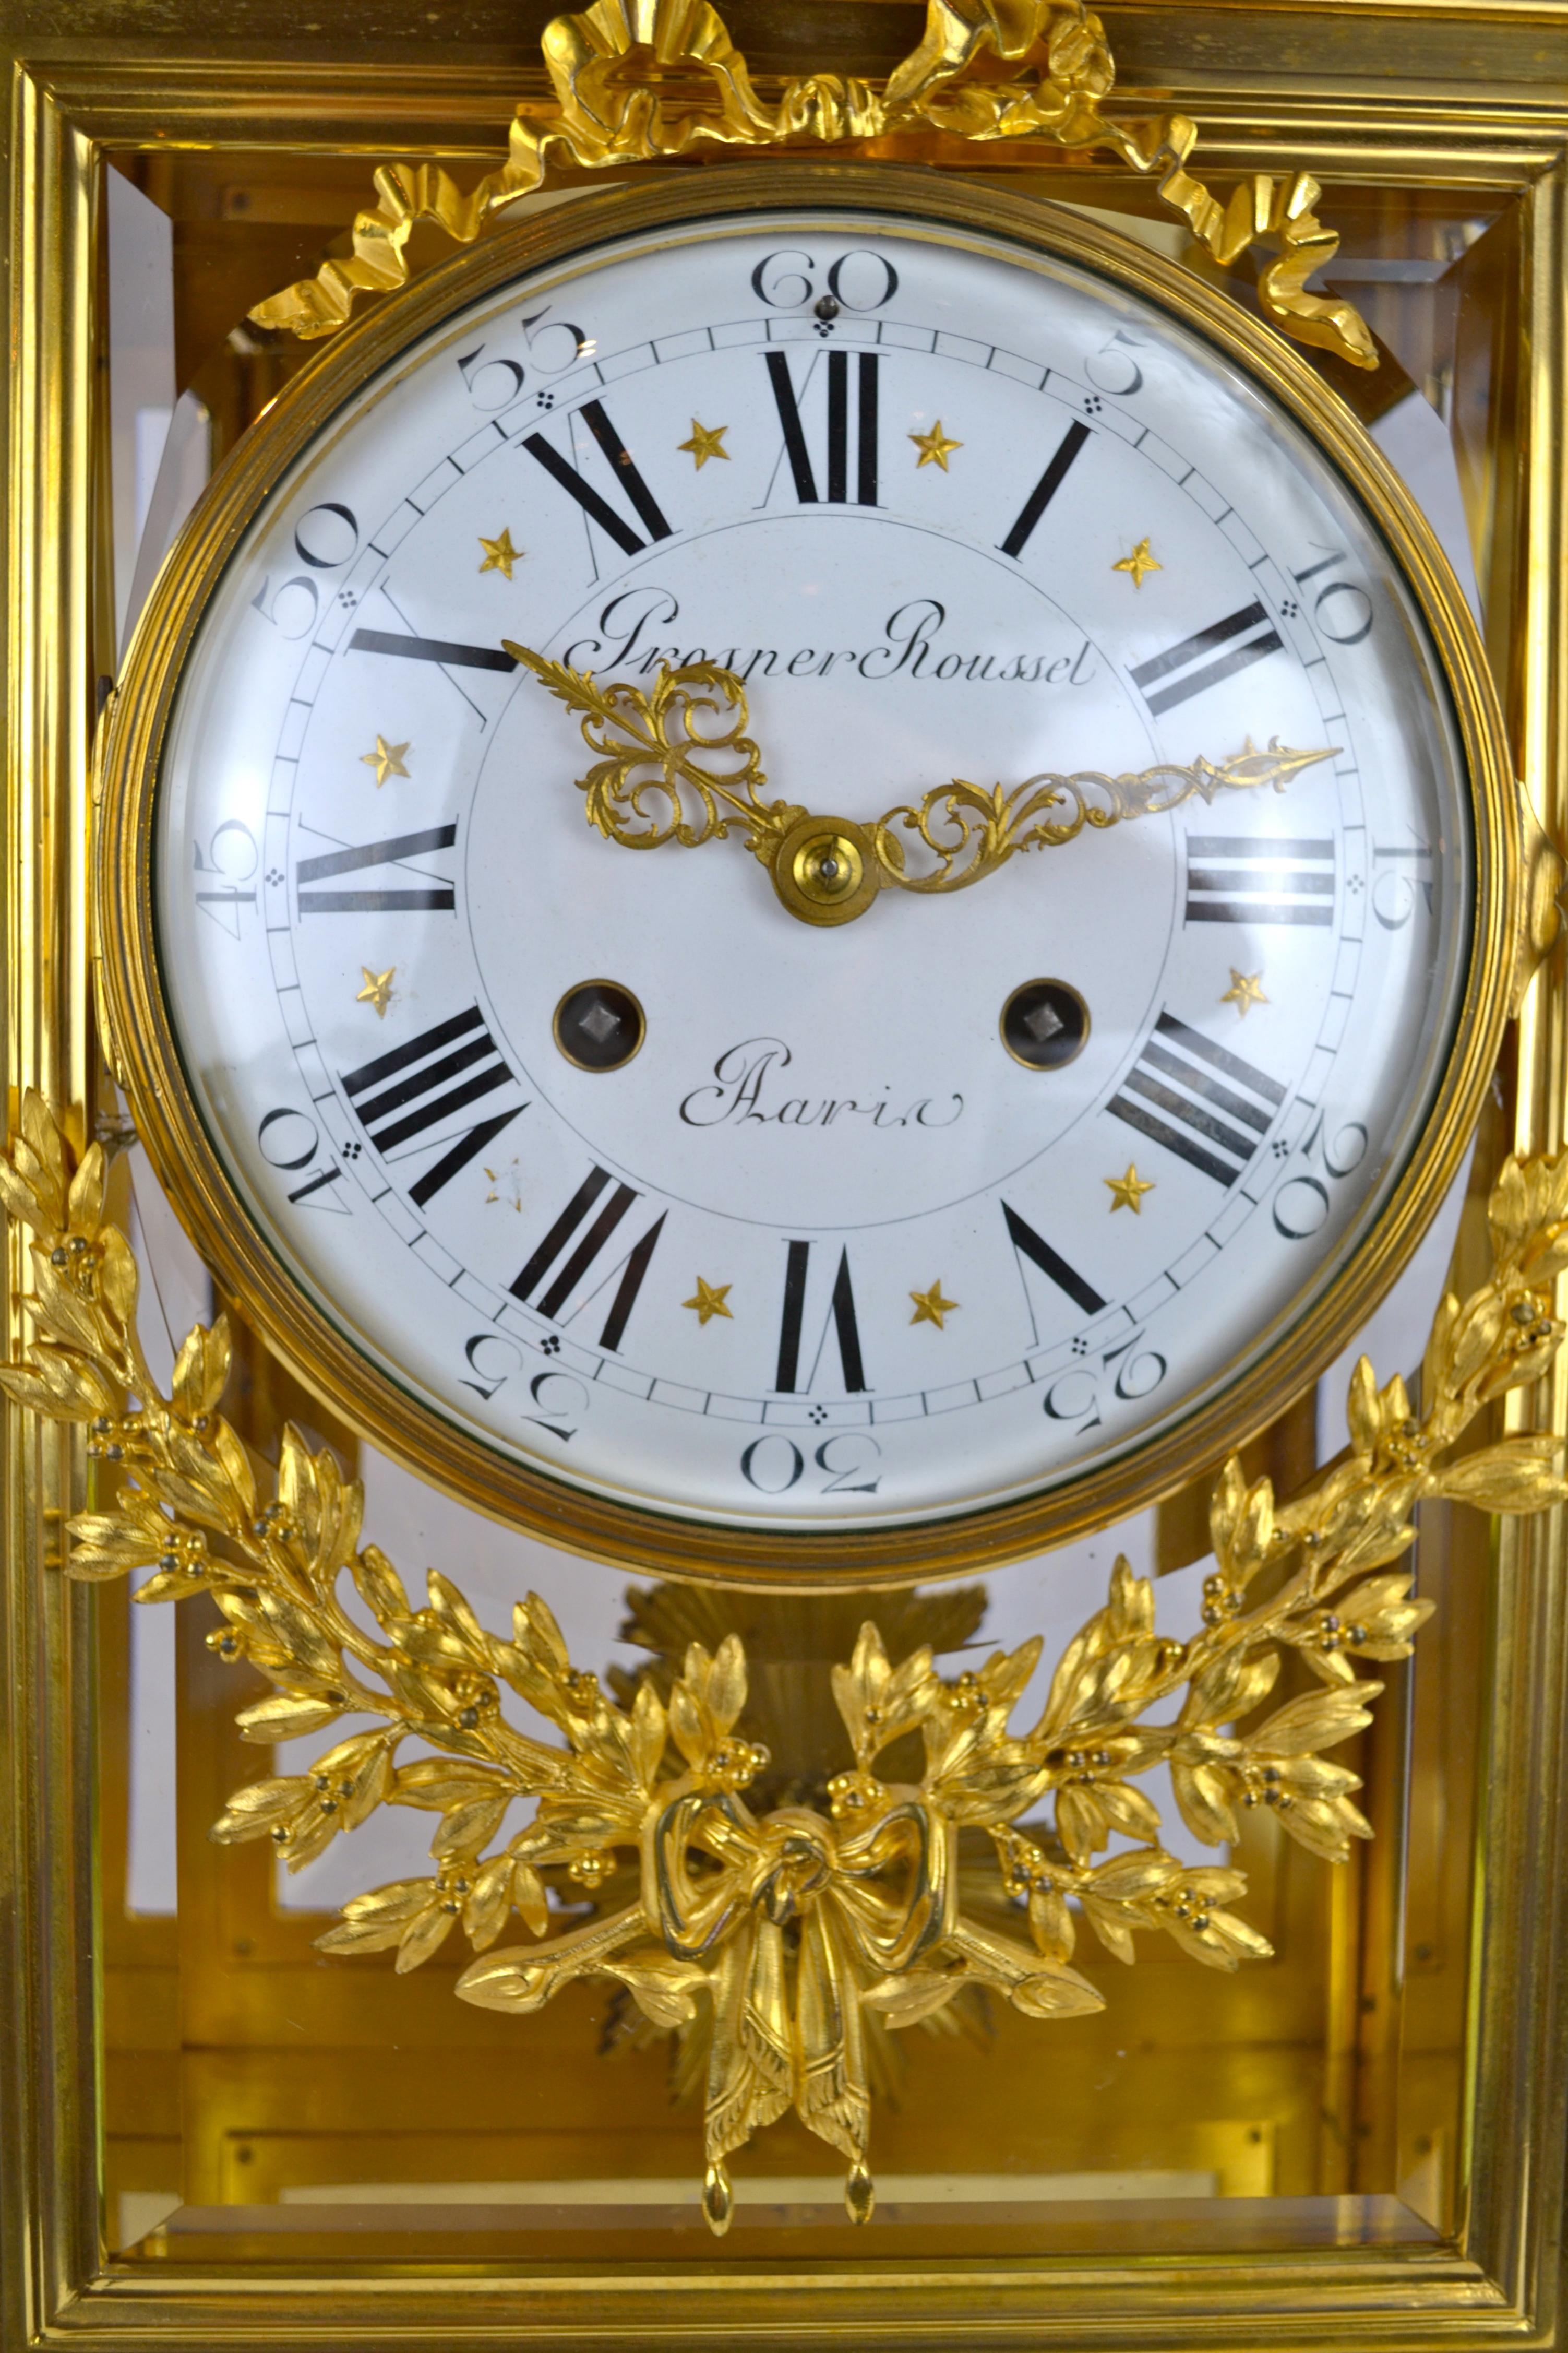 A French Louis XVI style gilt bronze regulator clock, the finely cast rectangular case with four beveled glass sides; the large white enamel dial with Roman numerals is decorated above and below with gilt bronze garlands. The dial is signed Prosper